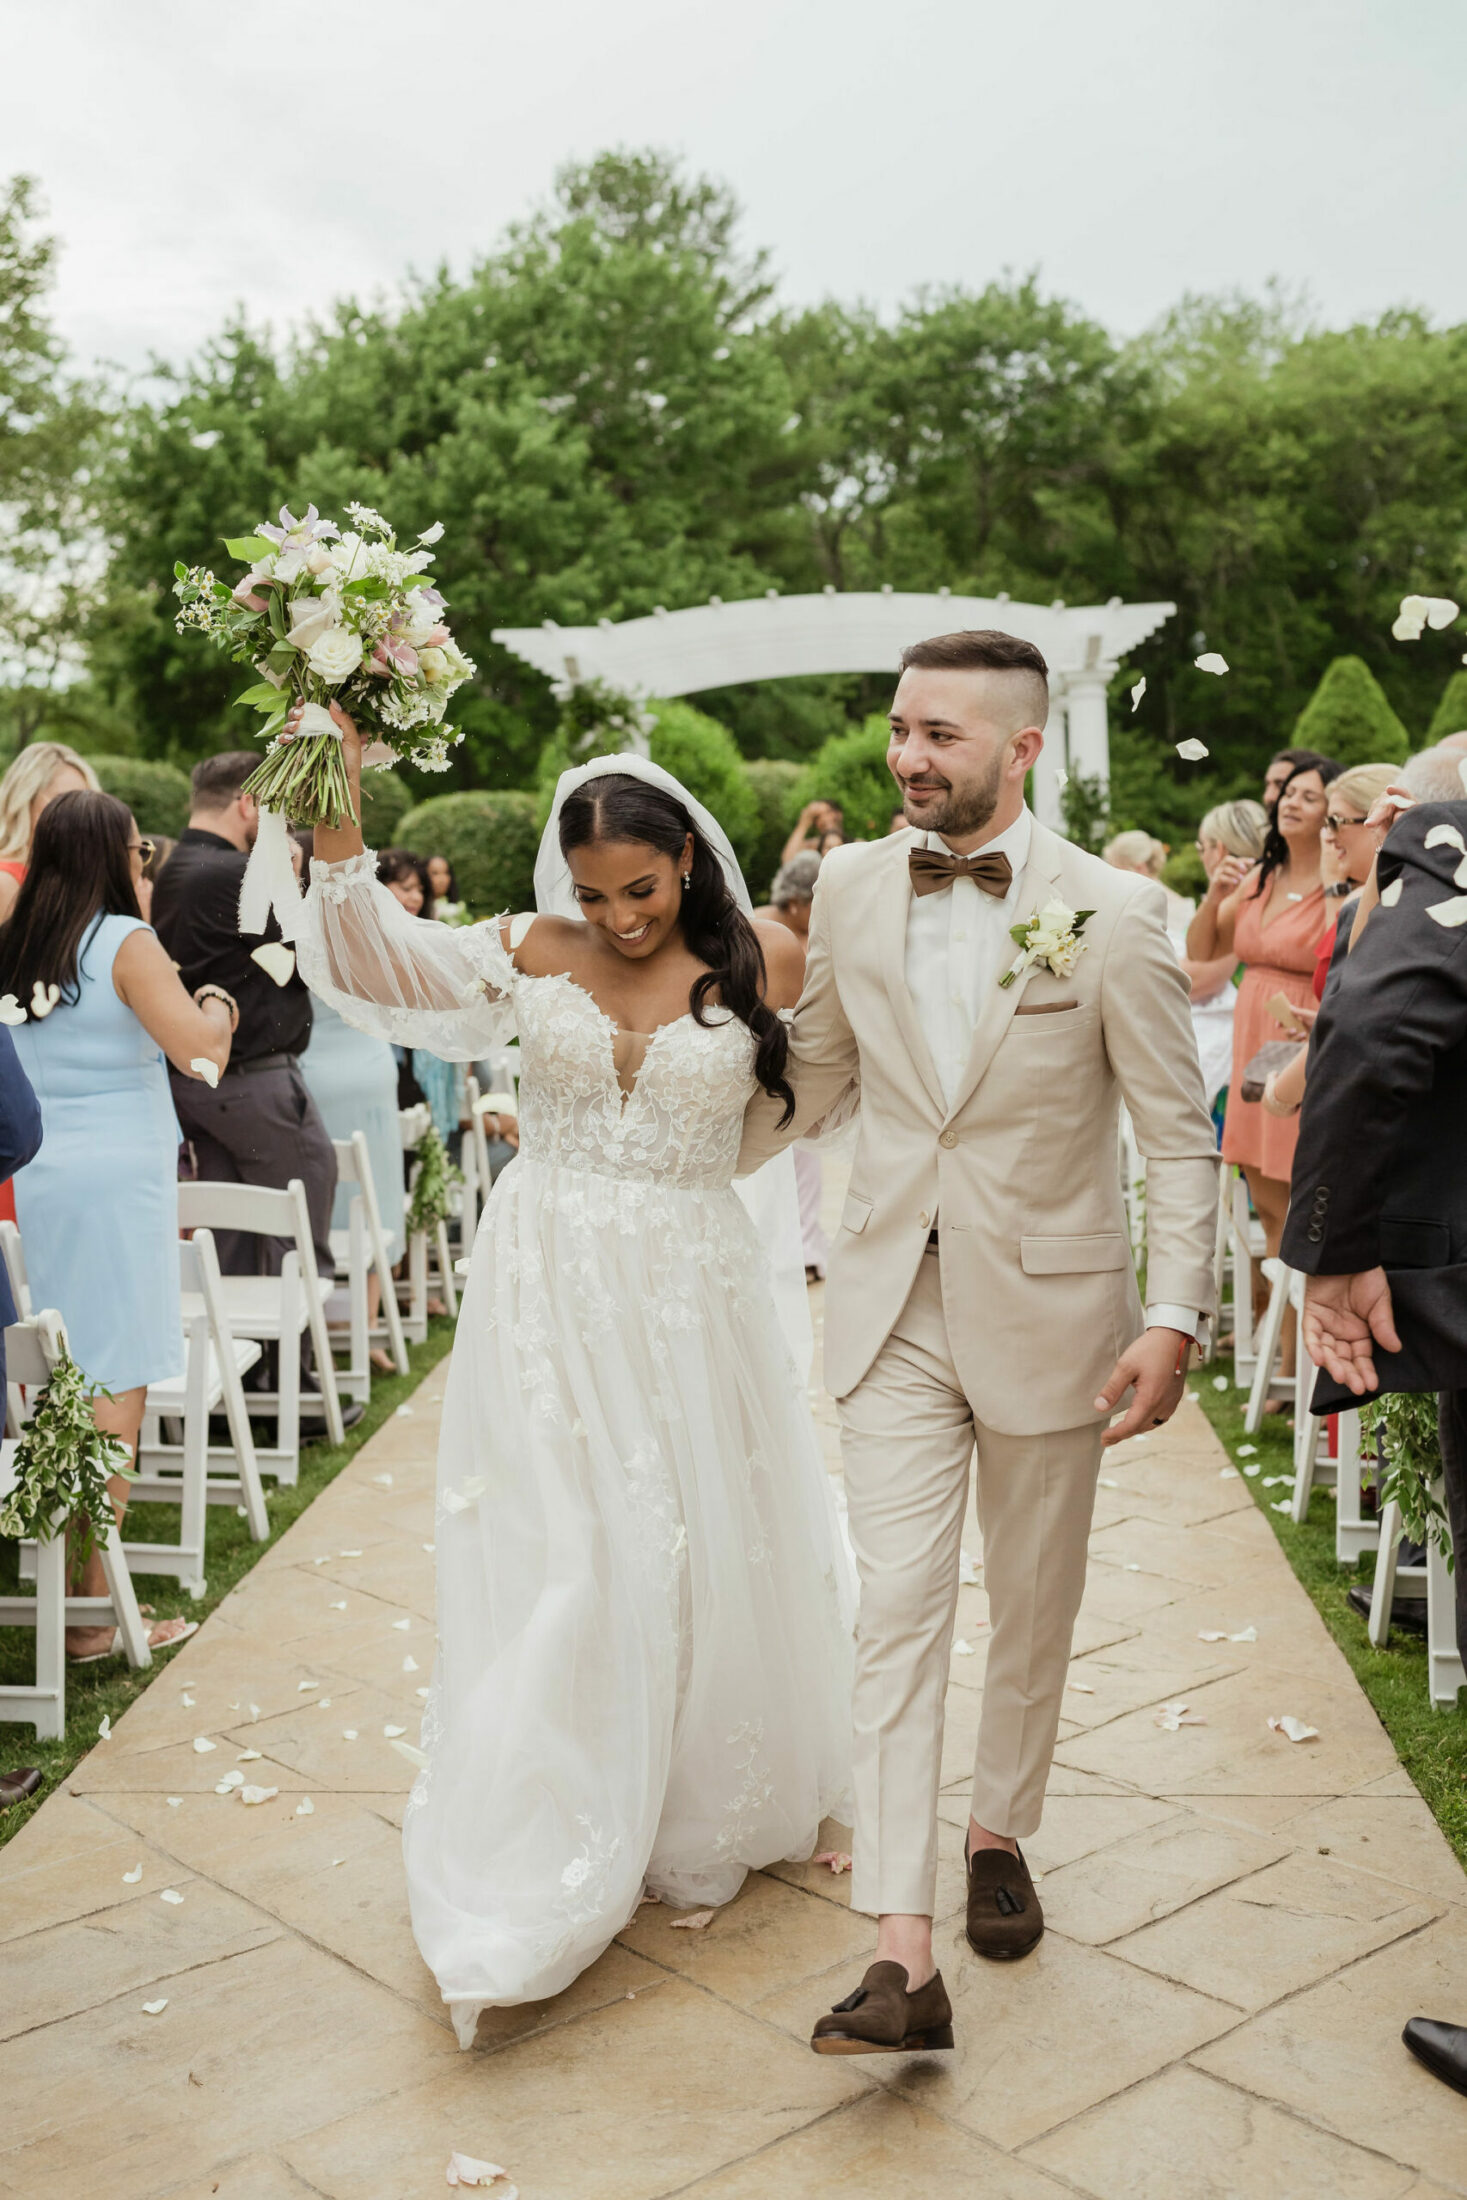 Outdoor Wedding Ceremony Recessional | Iryna's Photography